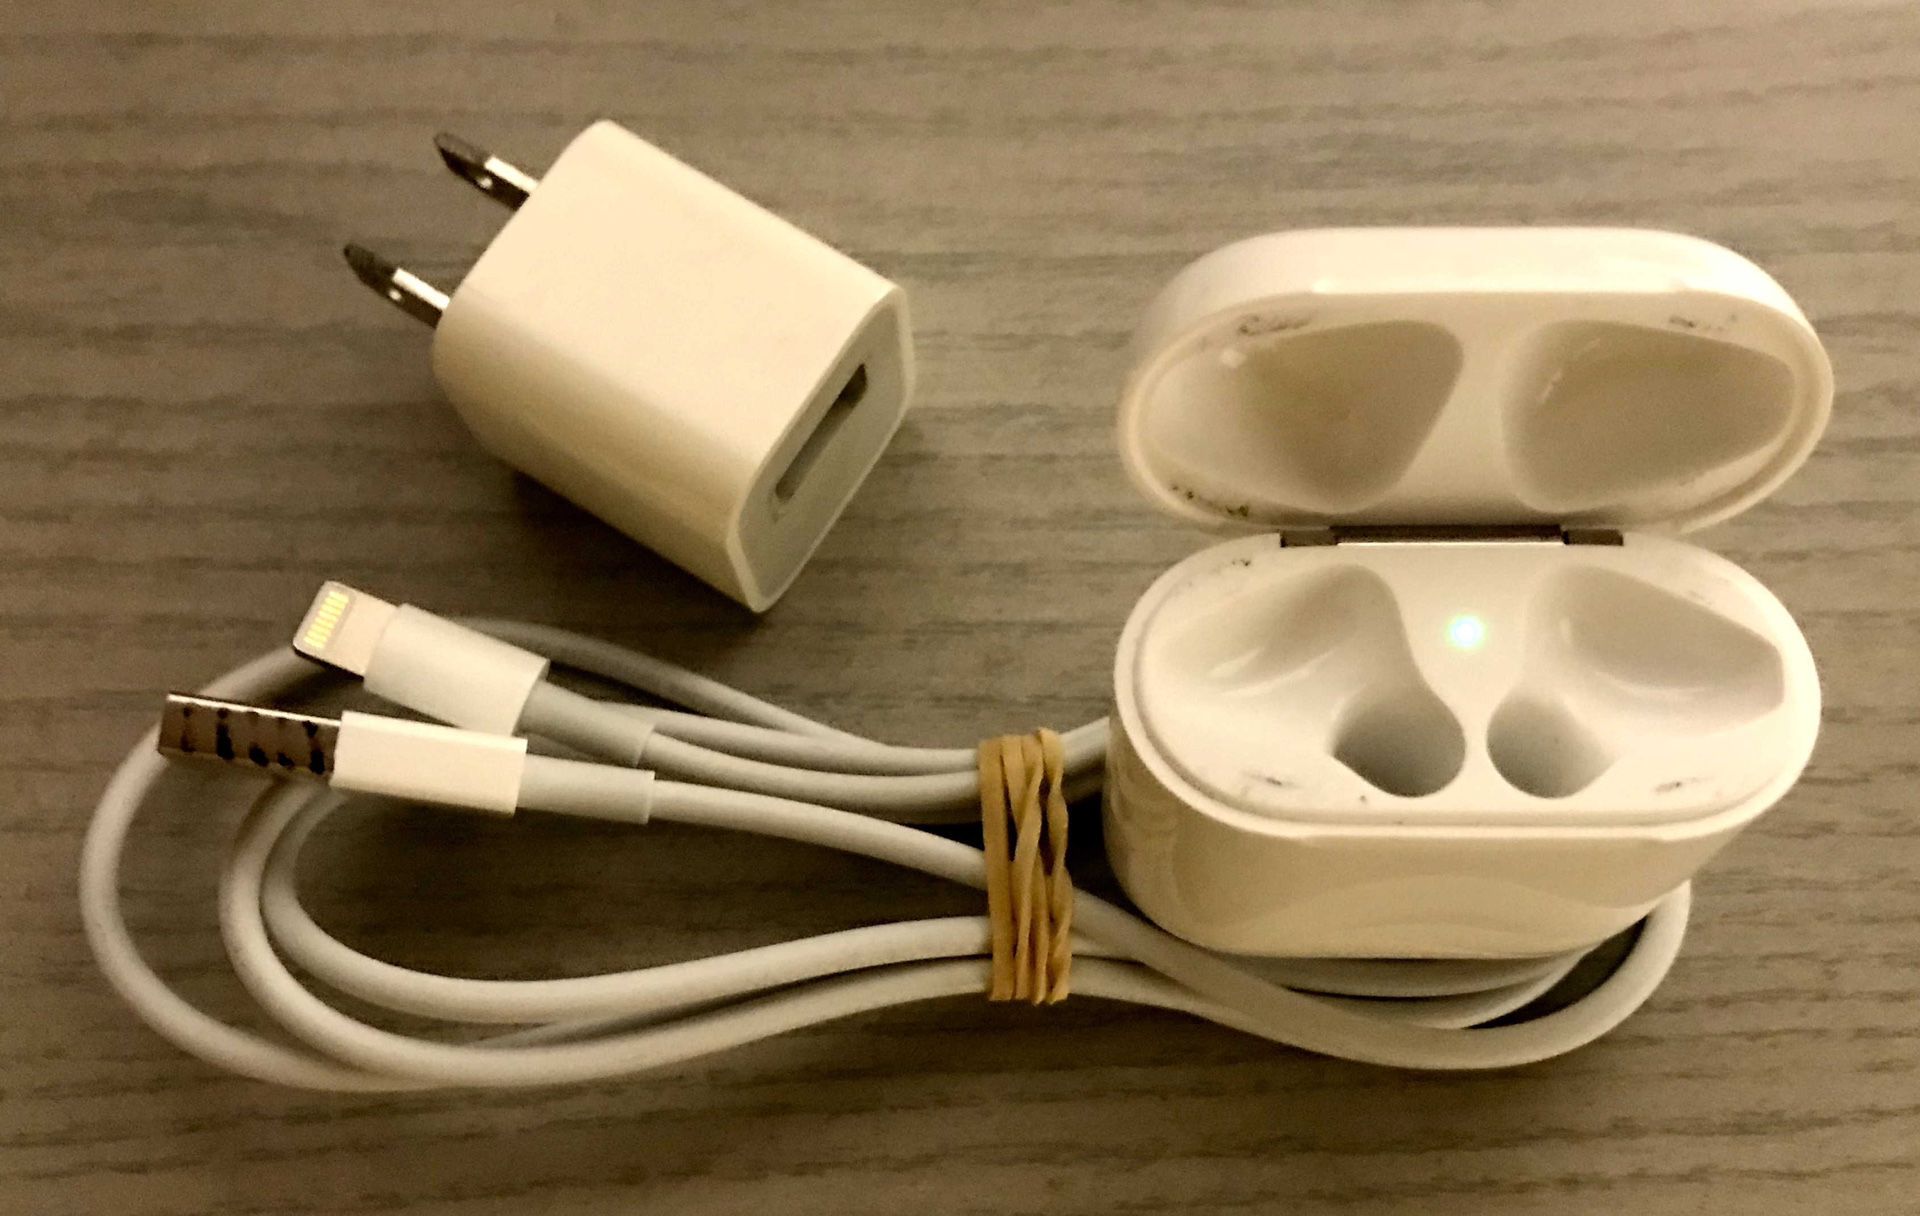 Apple 2nd Gen AirPods Charging Case with Charging Cable and Power Adapter 